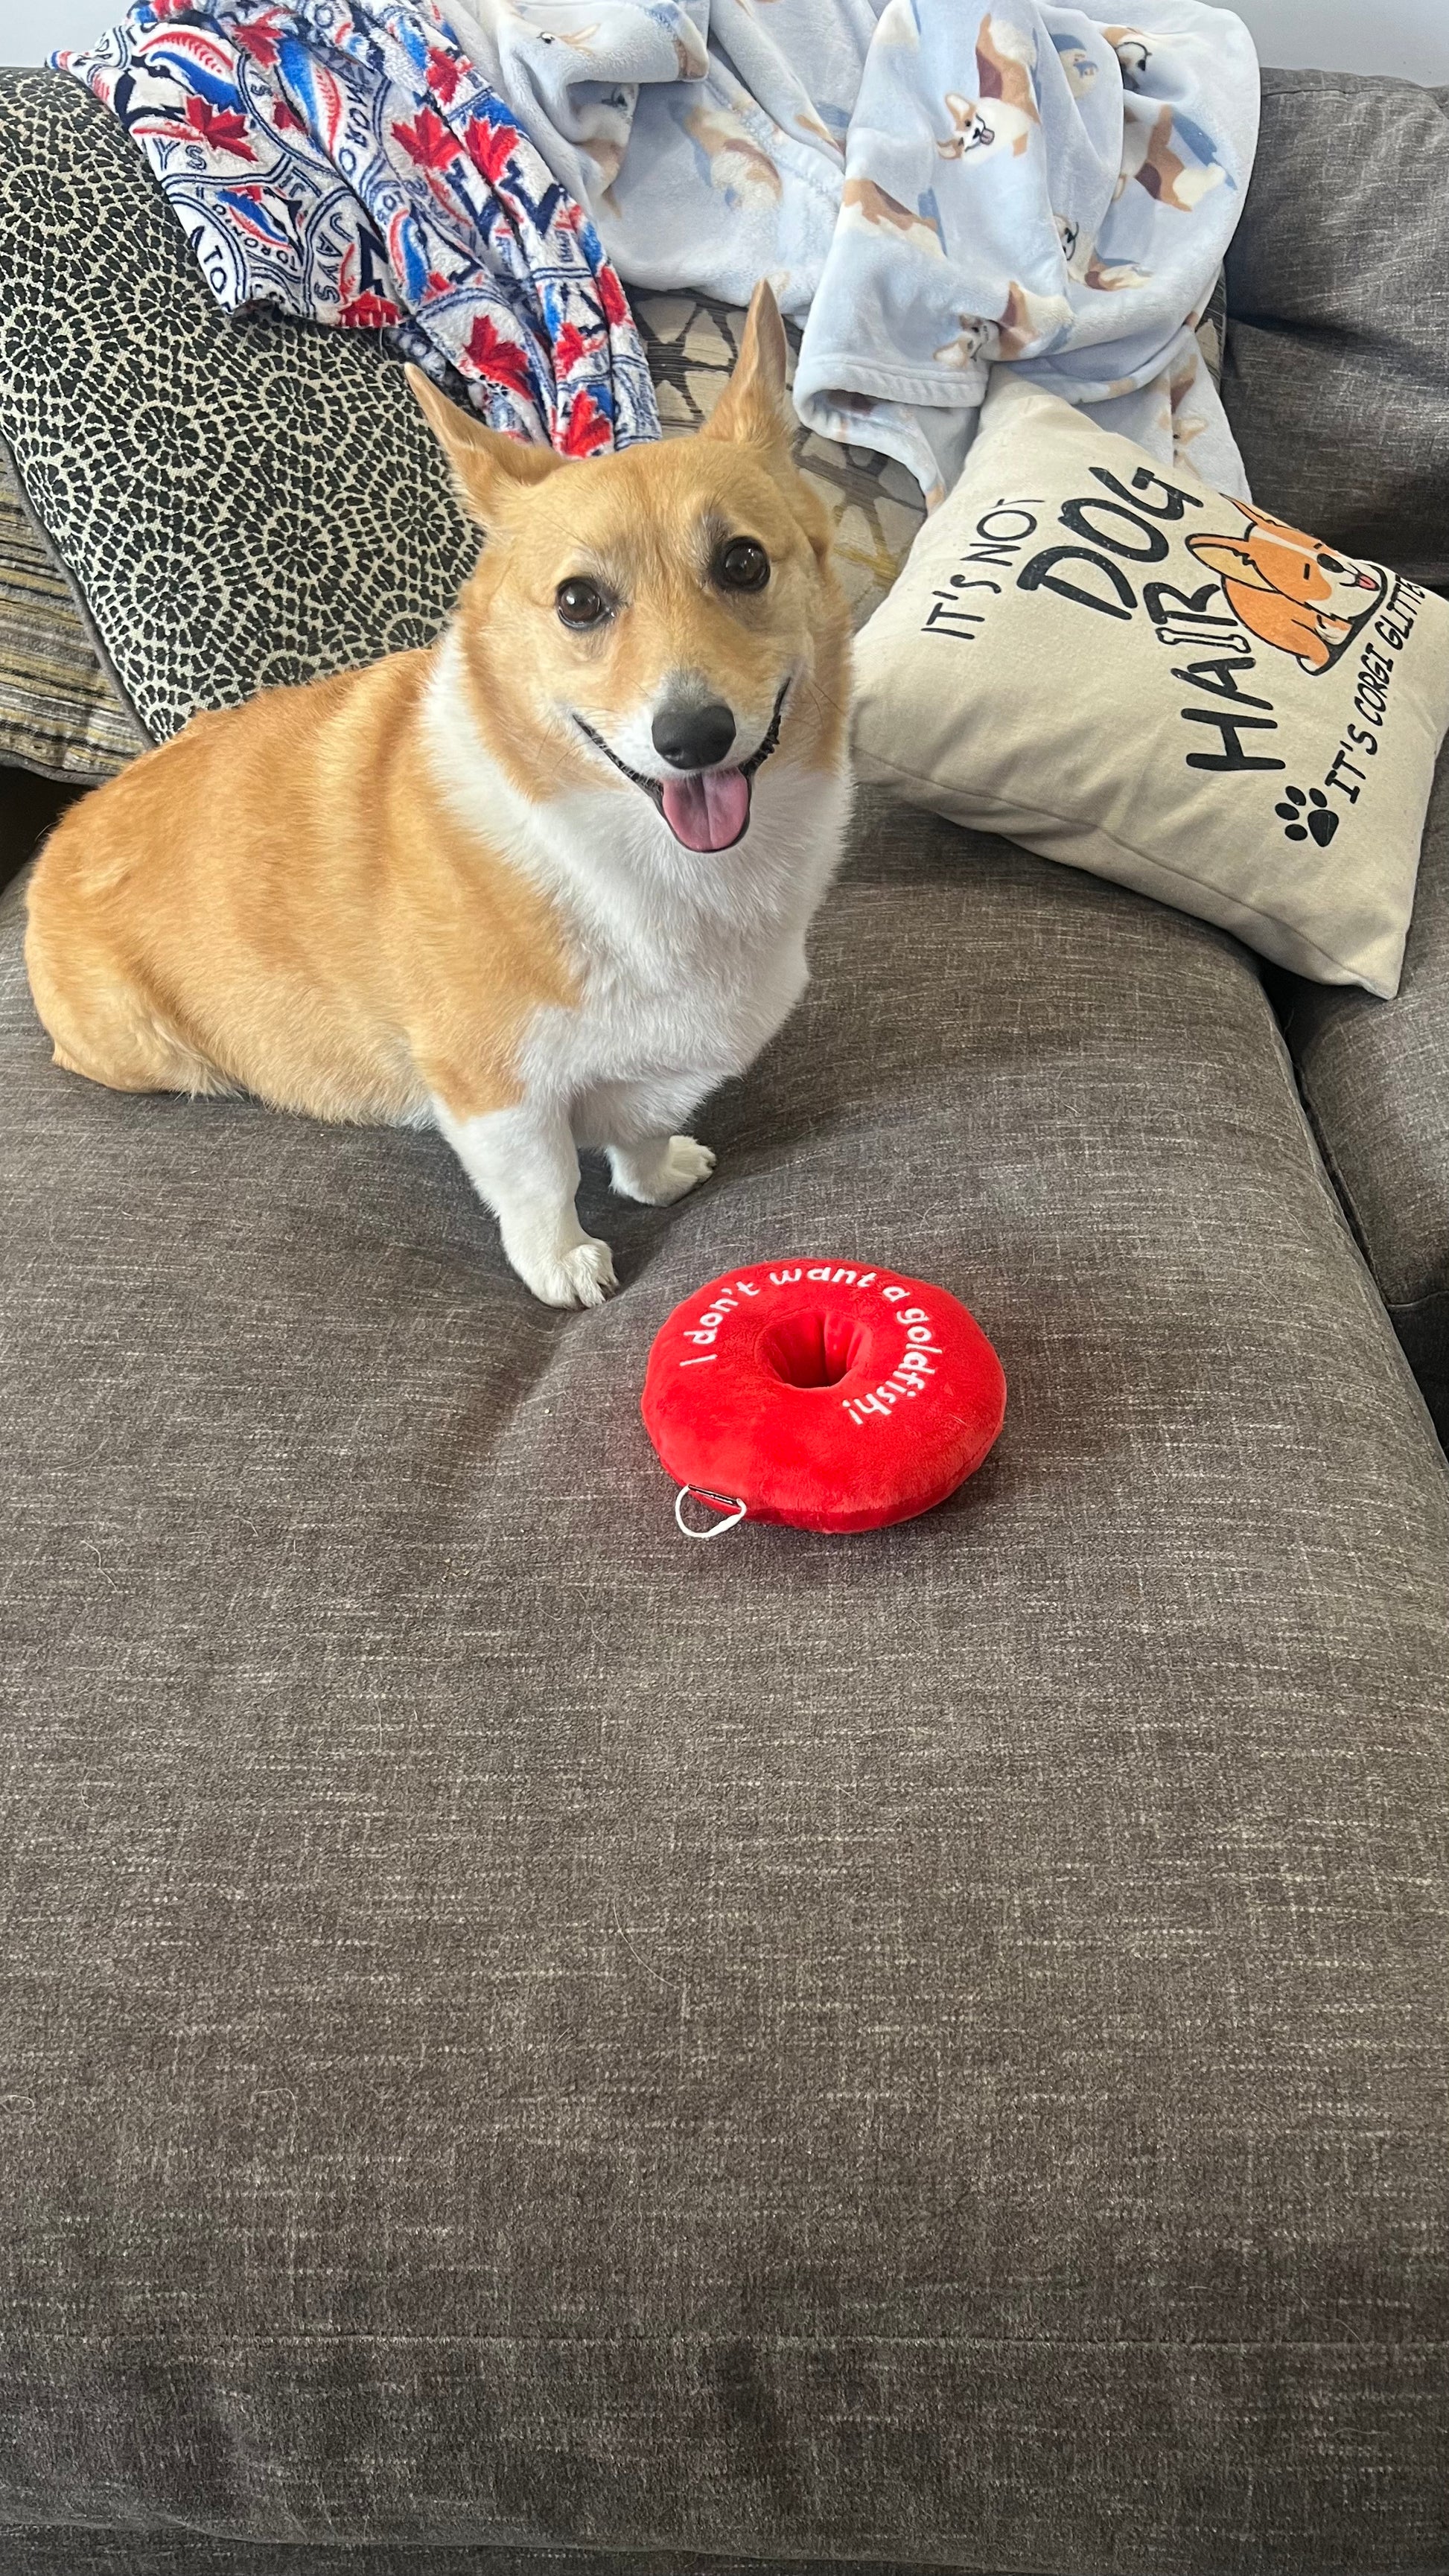 The Donut - Phish dog toy for Phan's best friend – Dog Faced Toys